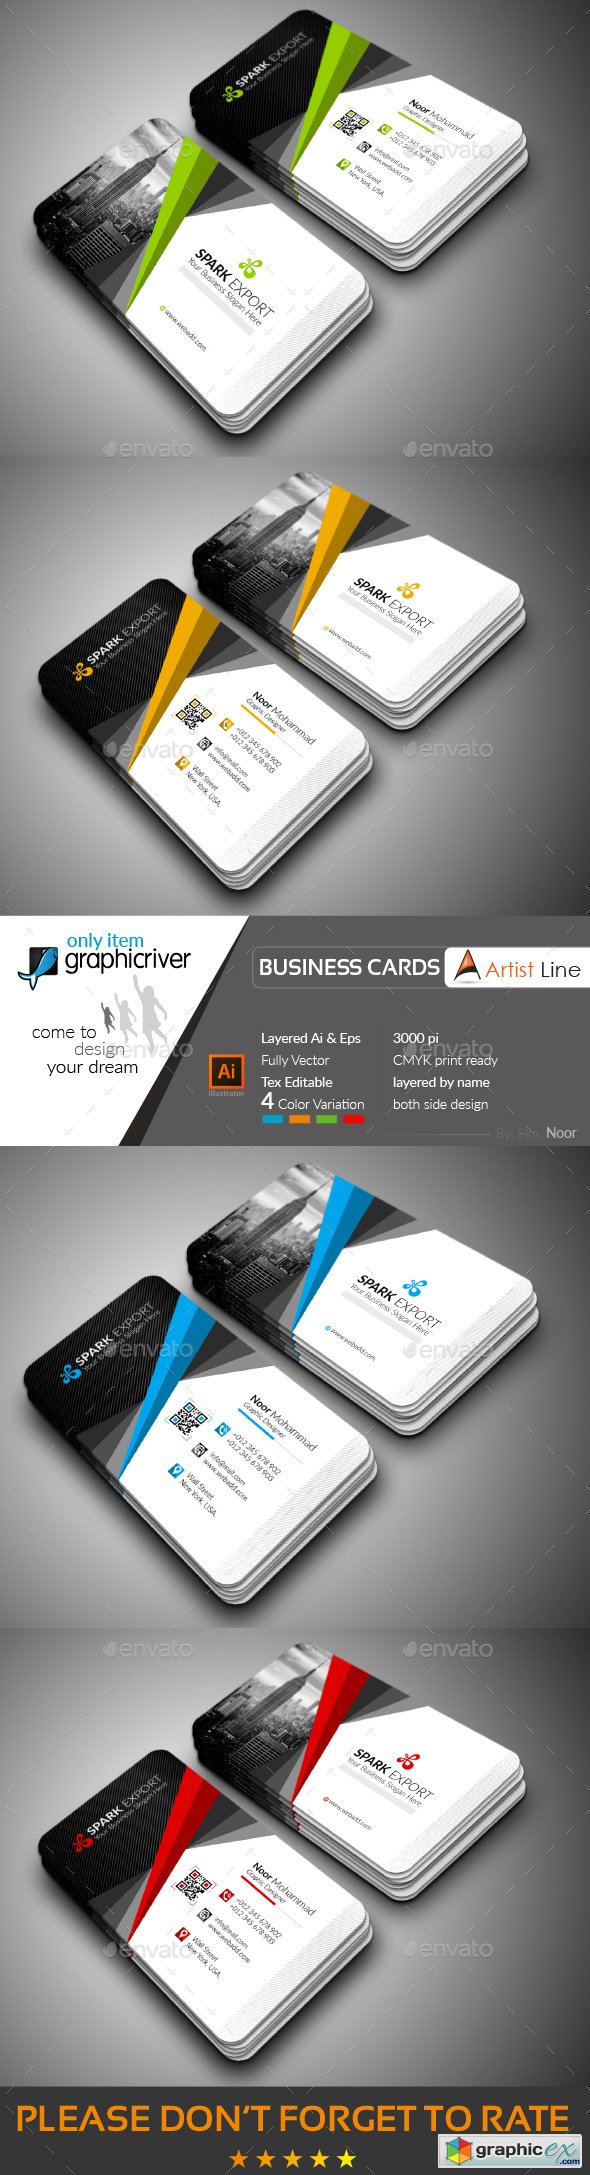 Photorealistic Business Card